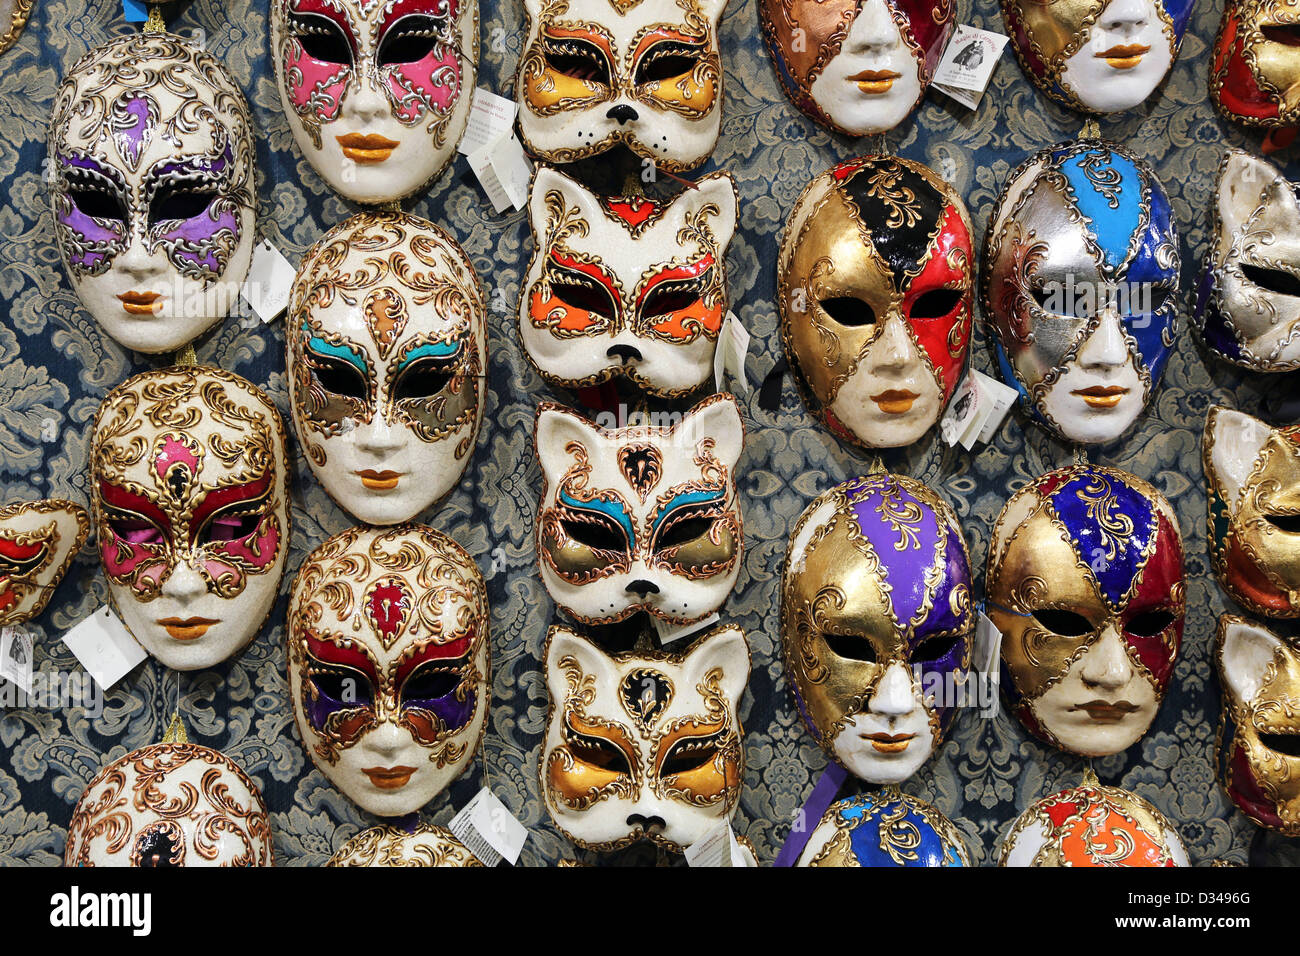 Venice, Italy. 8th February 2013. During the Venice Carnival, almost every shop in Venice sells masks. Perhaps the most popular tourist souvenir at carnival time, masks come in all shapes, sizes and prices. From the basic mask that covers the eyes to hand made and hand painted with gold leaf, you'll find them all. Credit:  Paul Brown / Alamy Live News Stock Photo